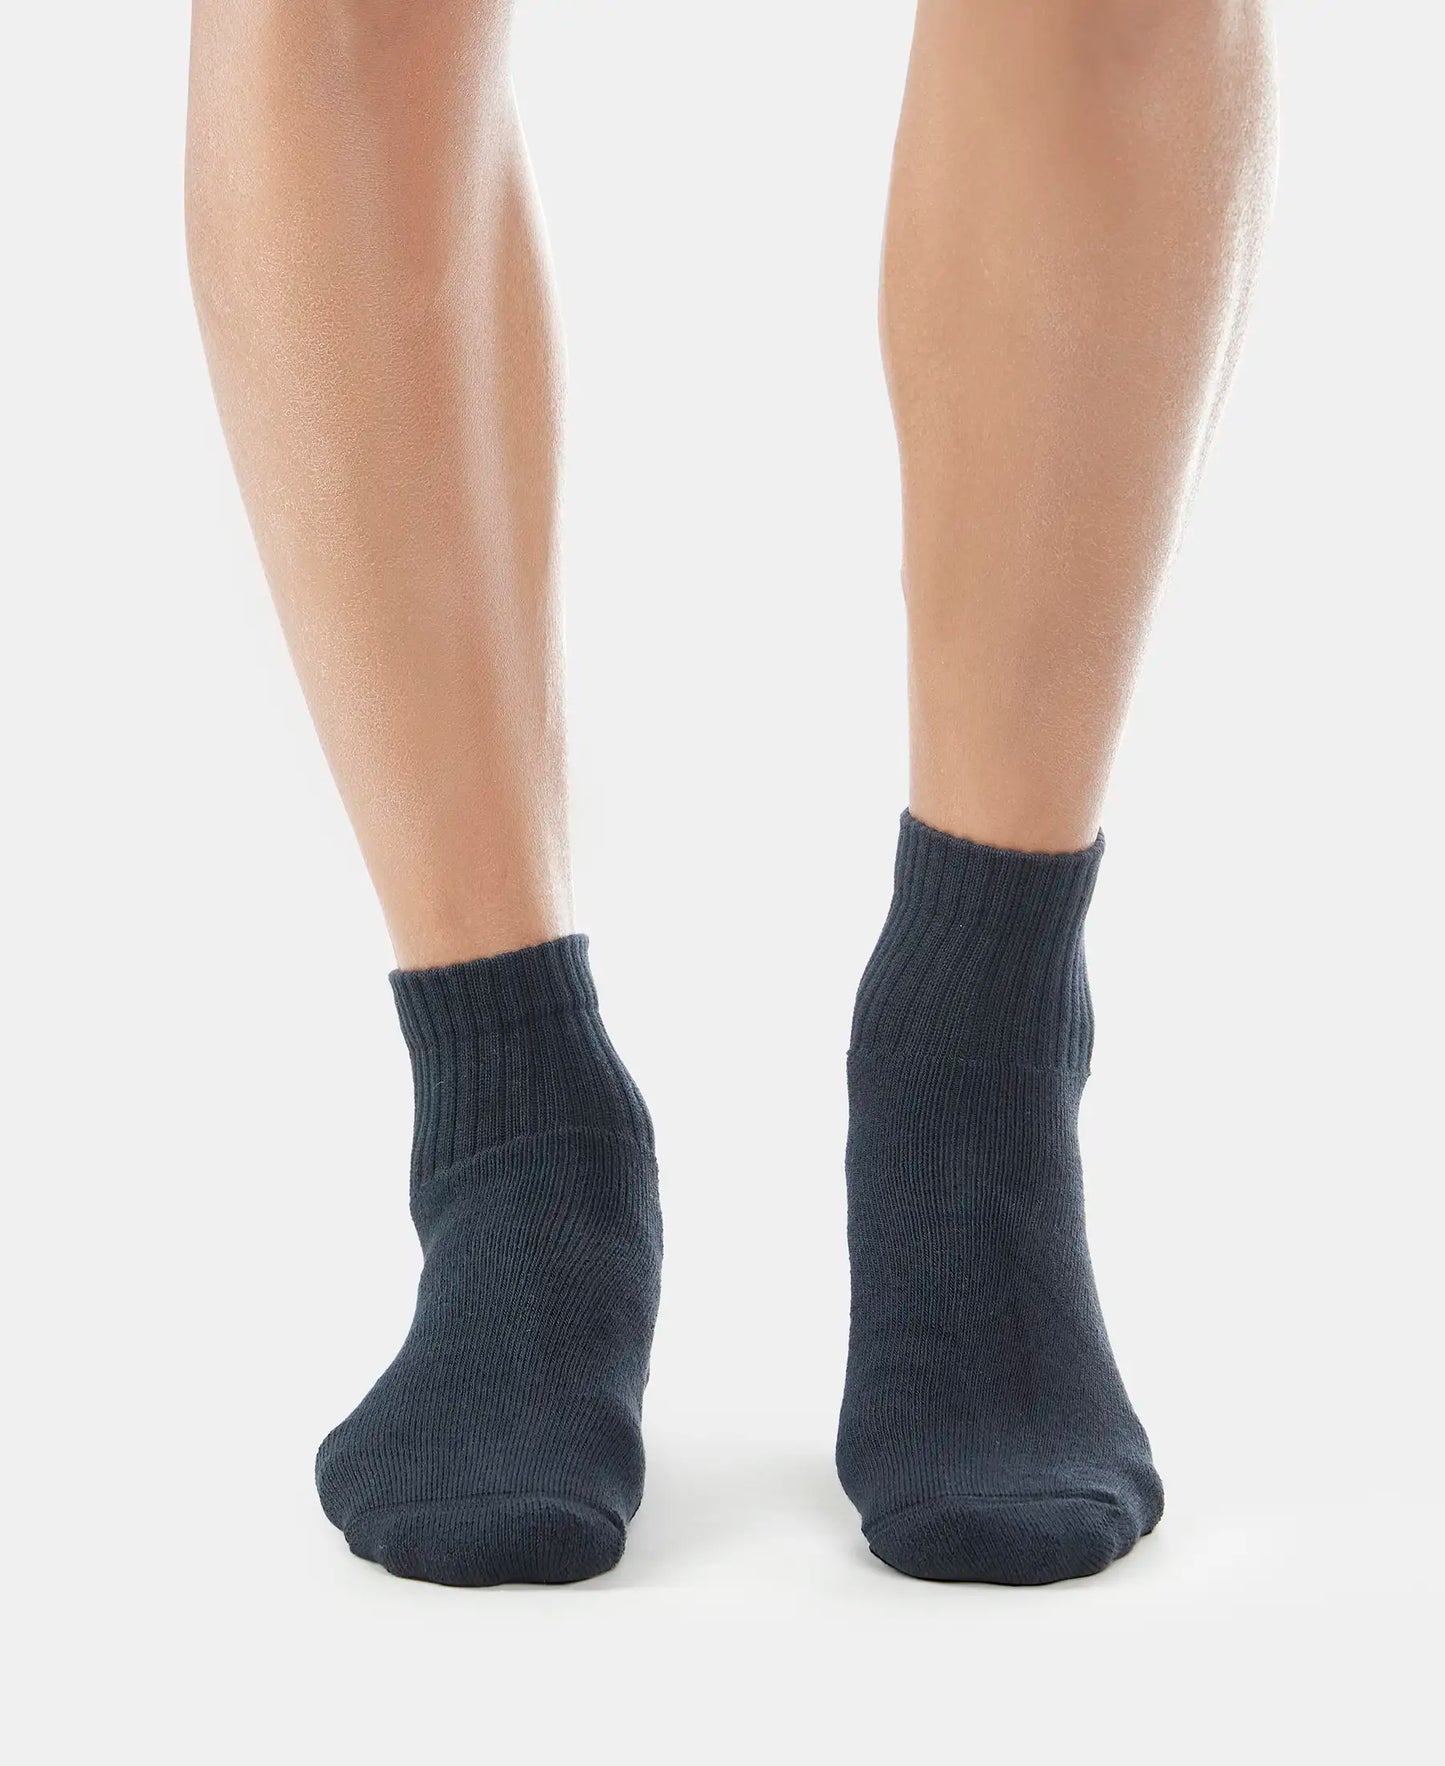 Compact Cotton Terry Ankle Length Socks With StayFresh Treatment - Black/Midgrey Melange/Navy-6